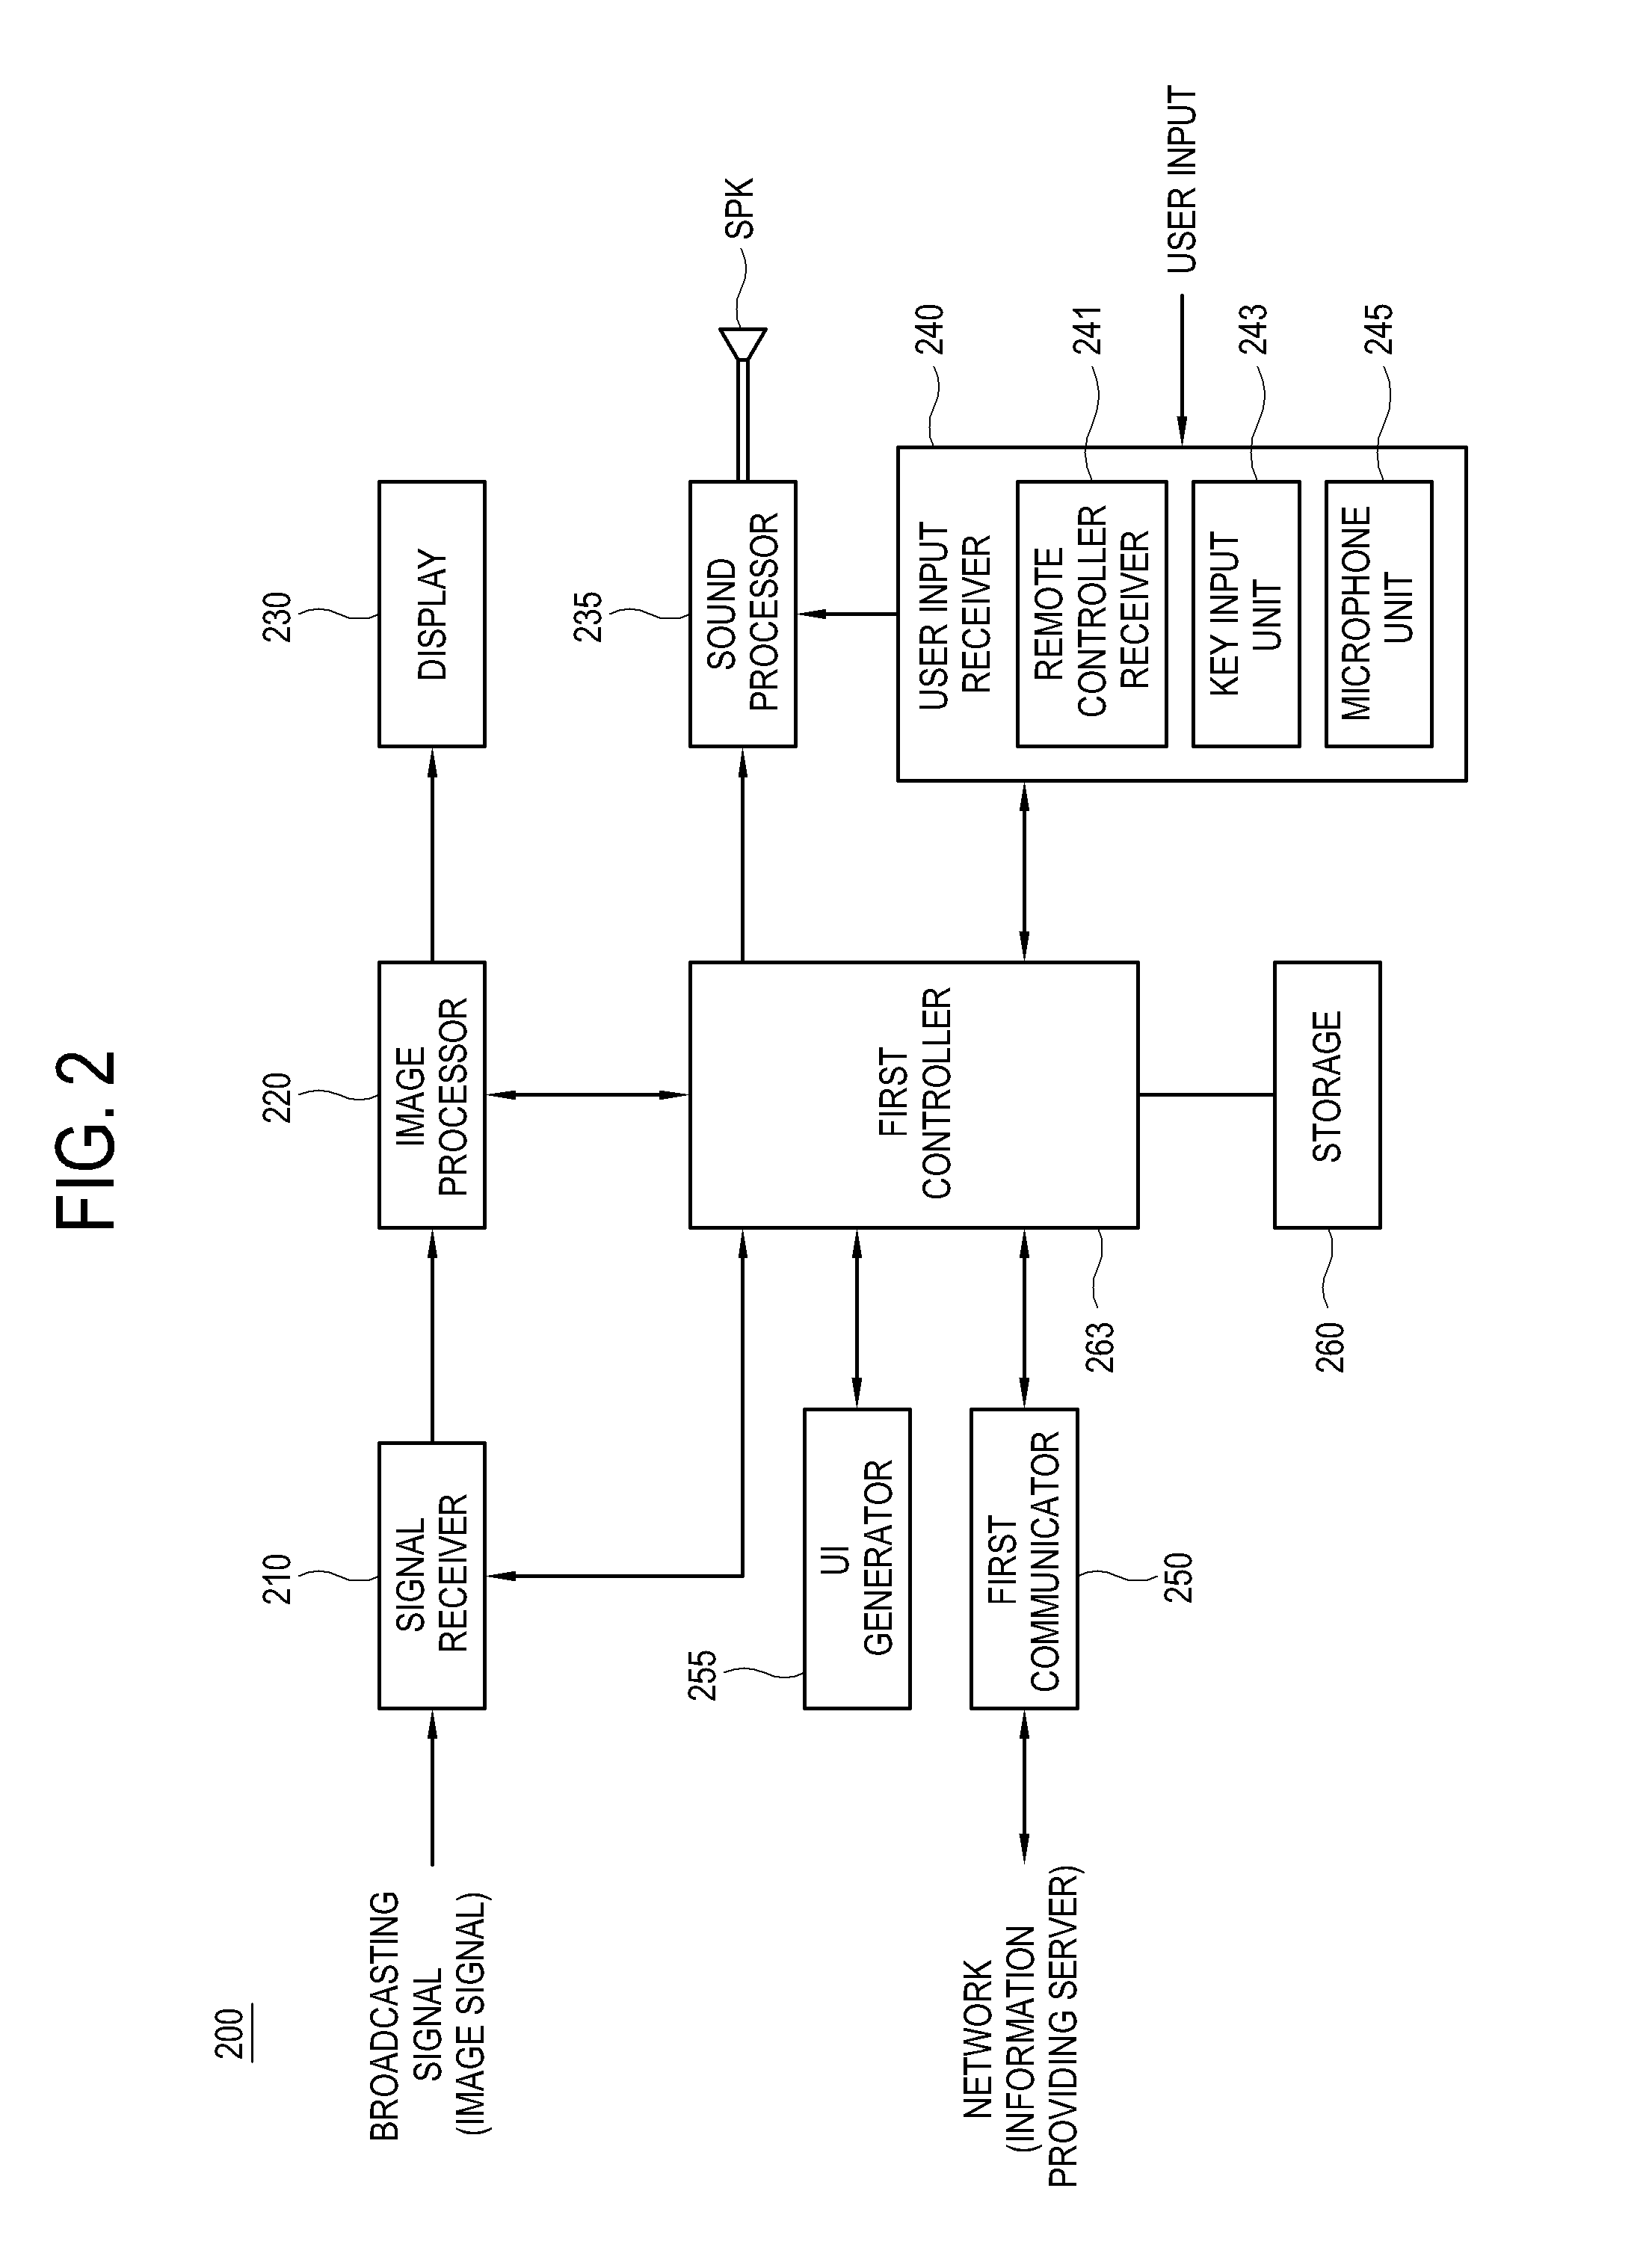 Display apparatus, server, system and postviewing related content information providing and evaluating methods thereof